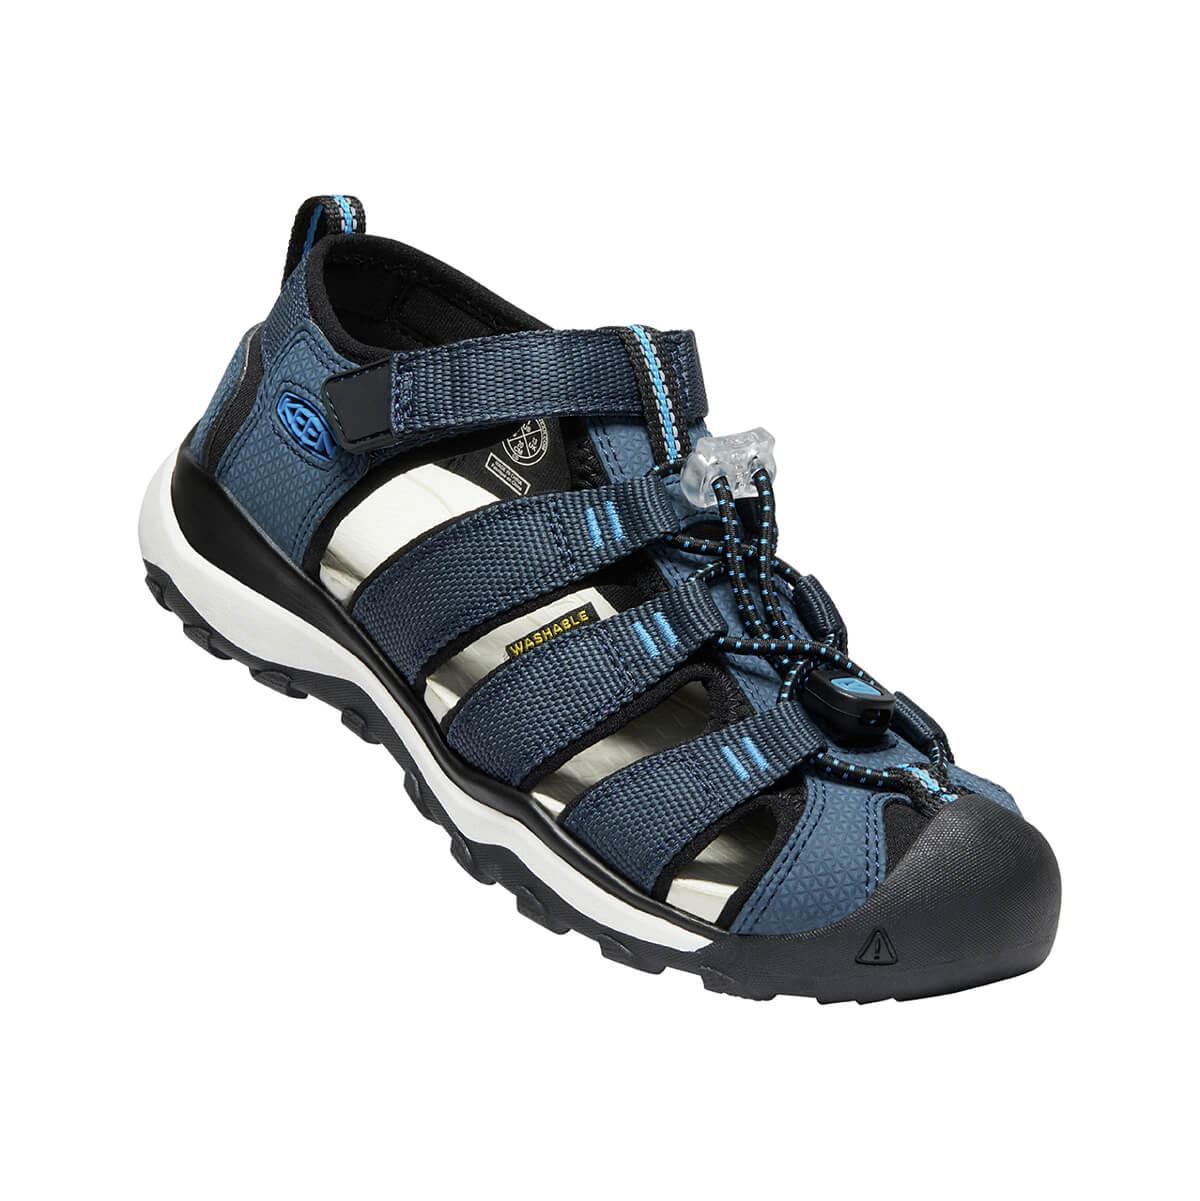  Youth Newport Neo H2 Sandals